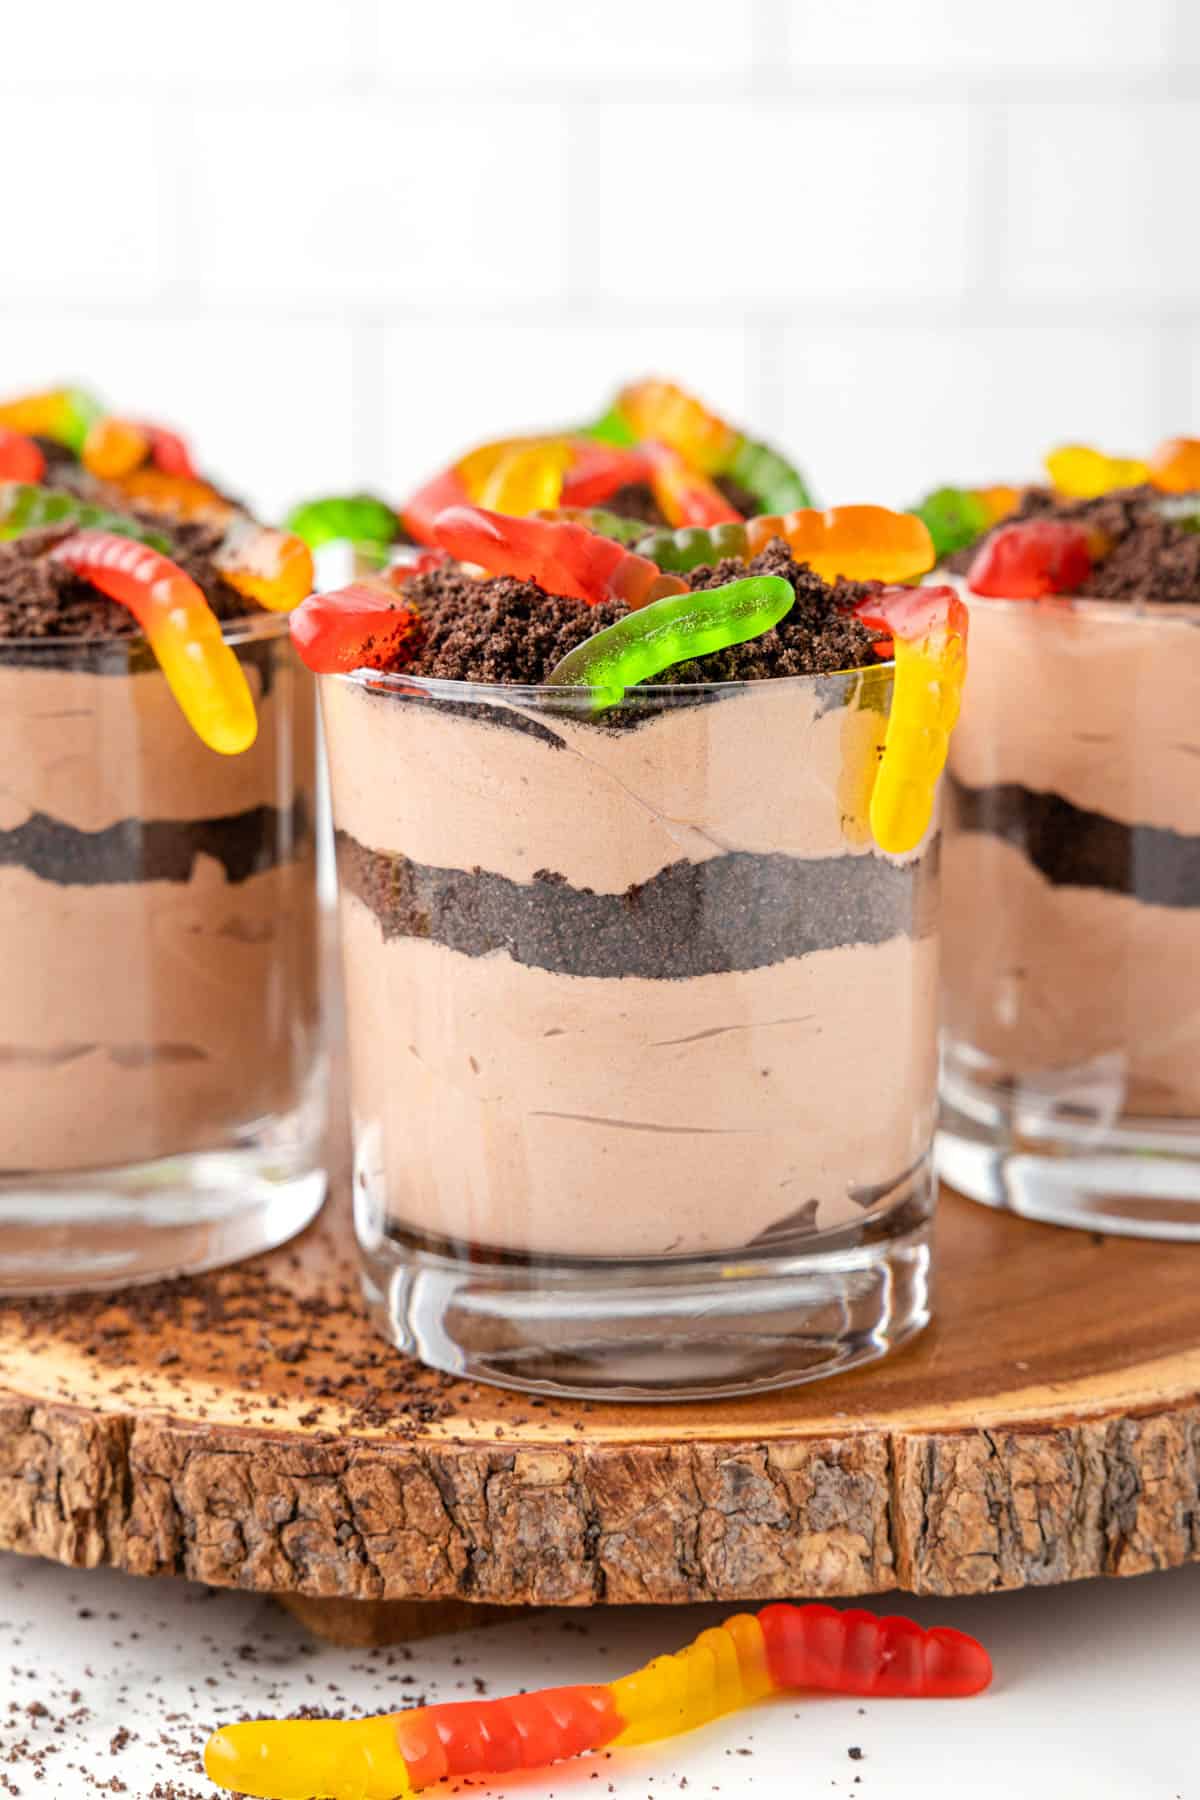 Dessert cups of dirt with gummy worms on top.